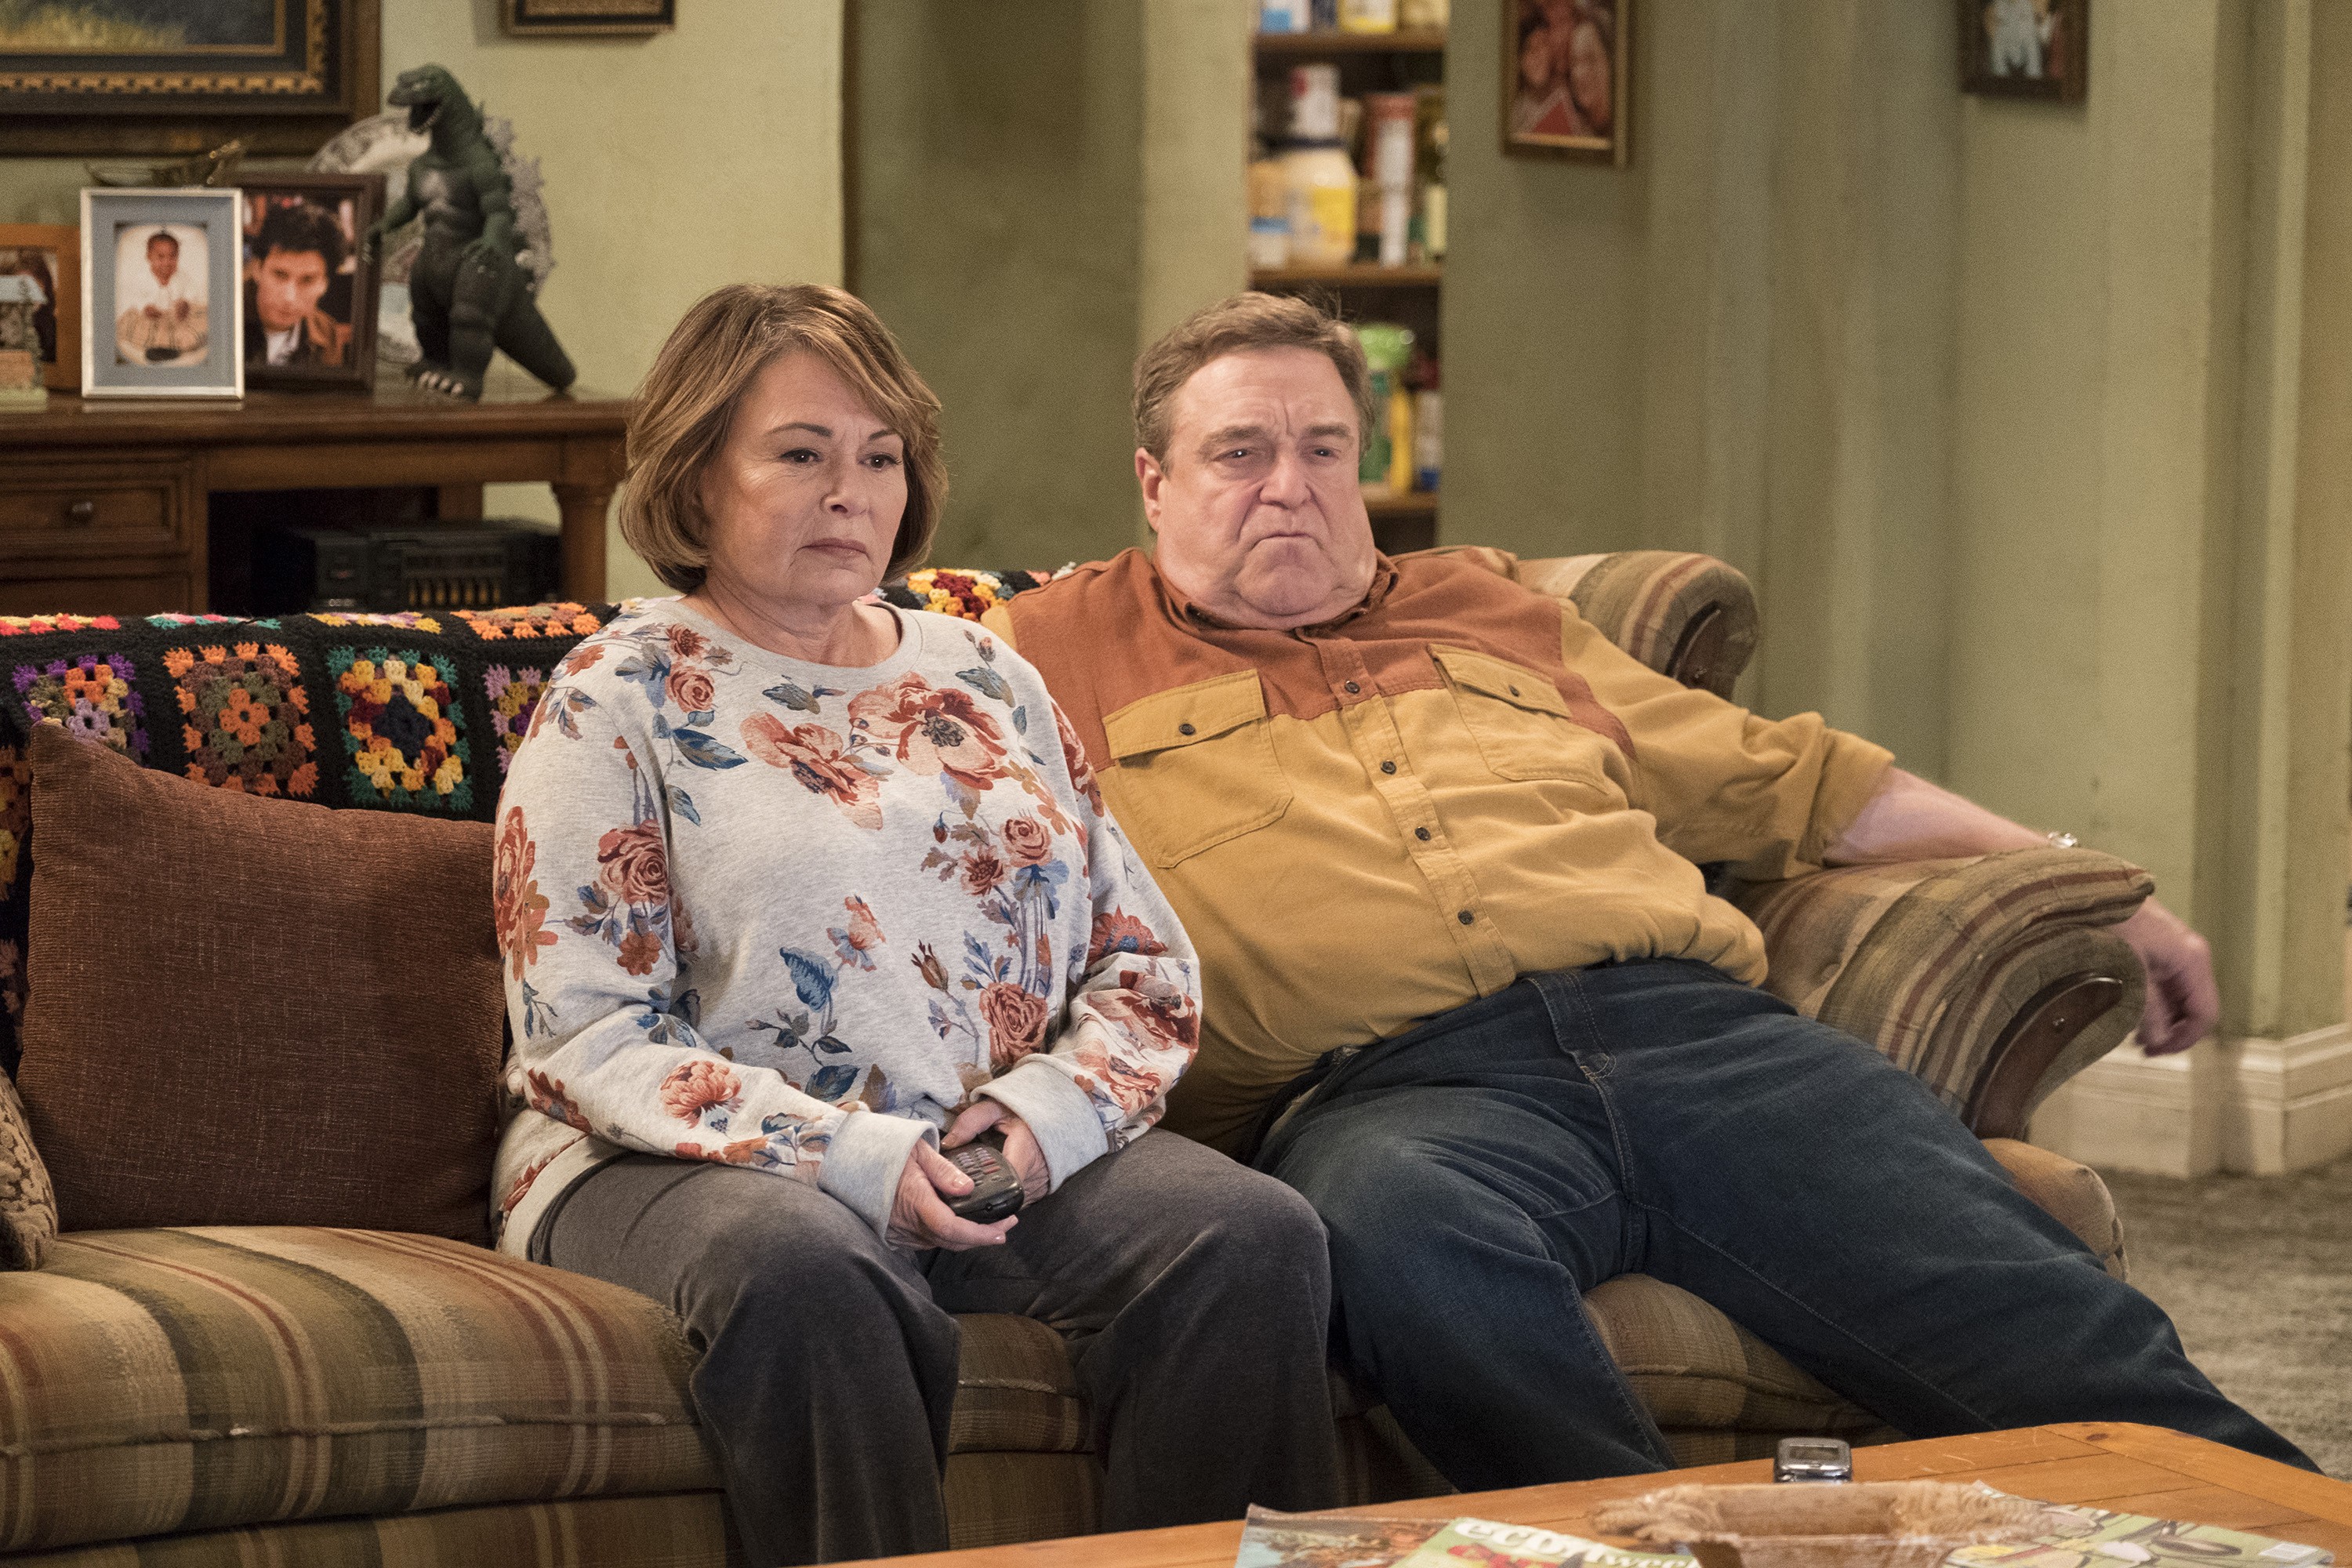 Roseanne Barr and John Goodman in a still from the television show Roseanne that was cancelled after Barr’s racist outburst on Twitter. Photo: ABC